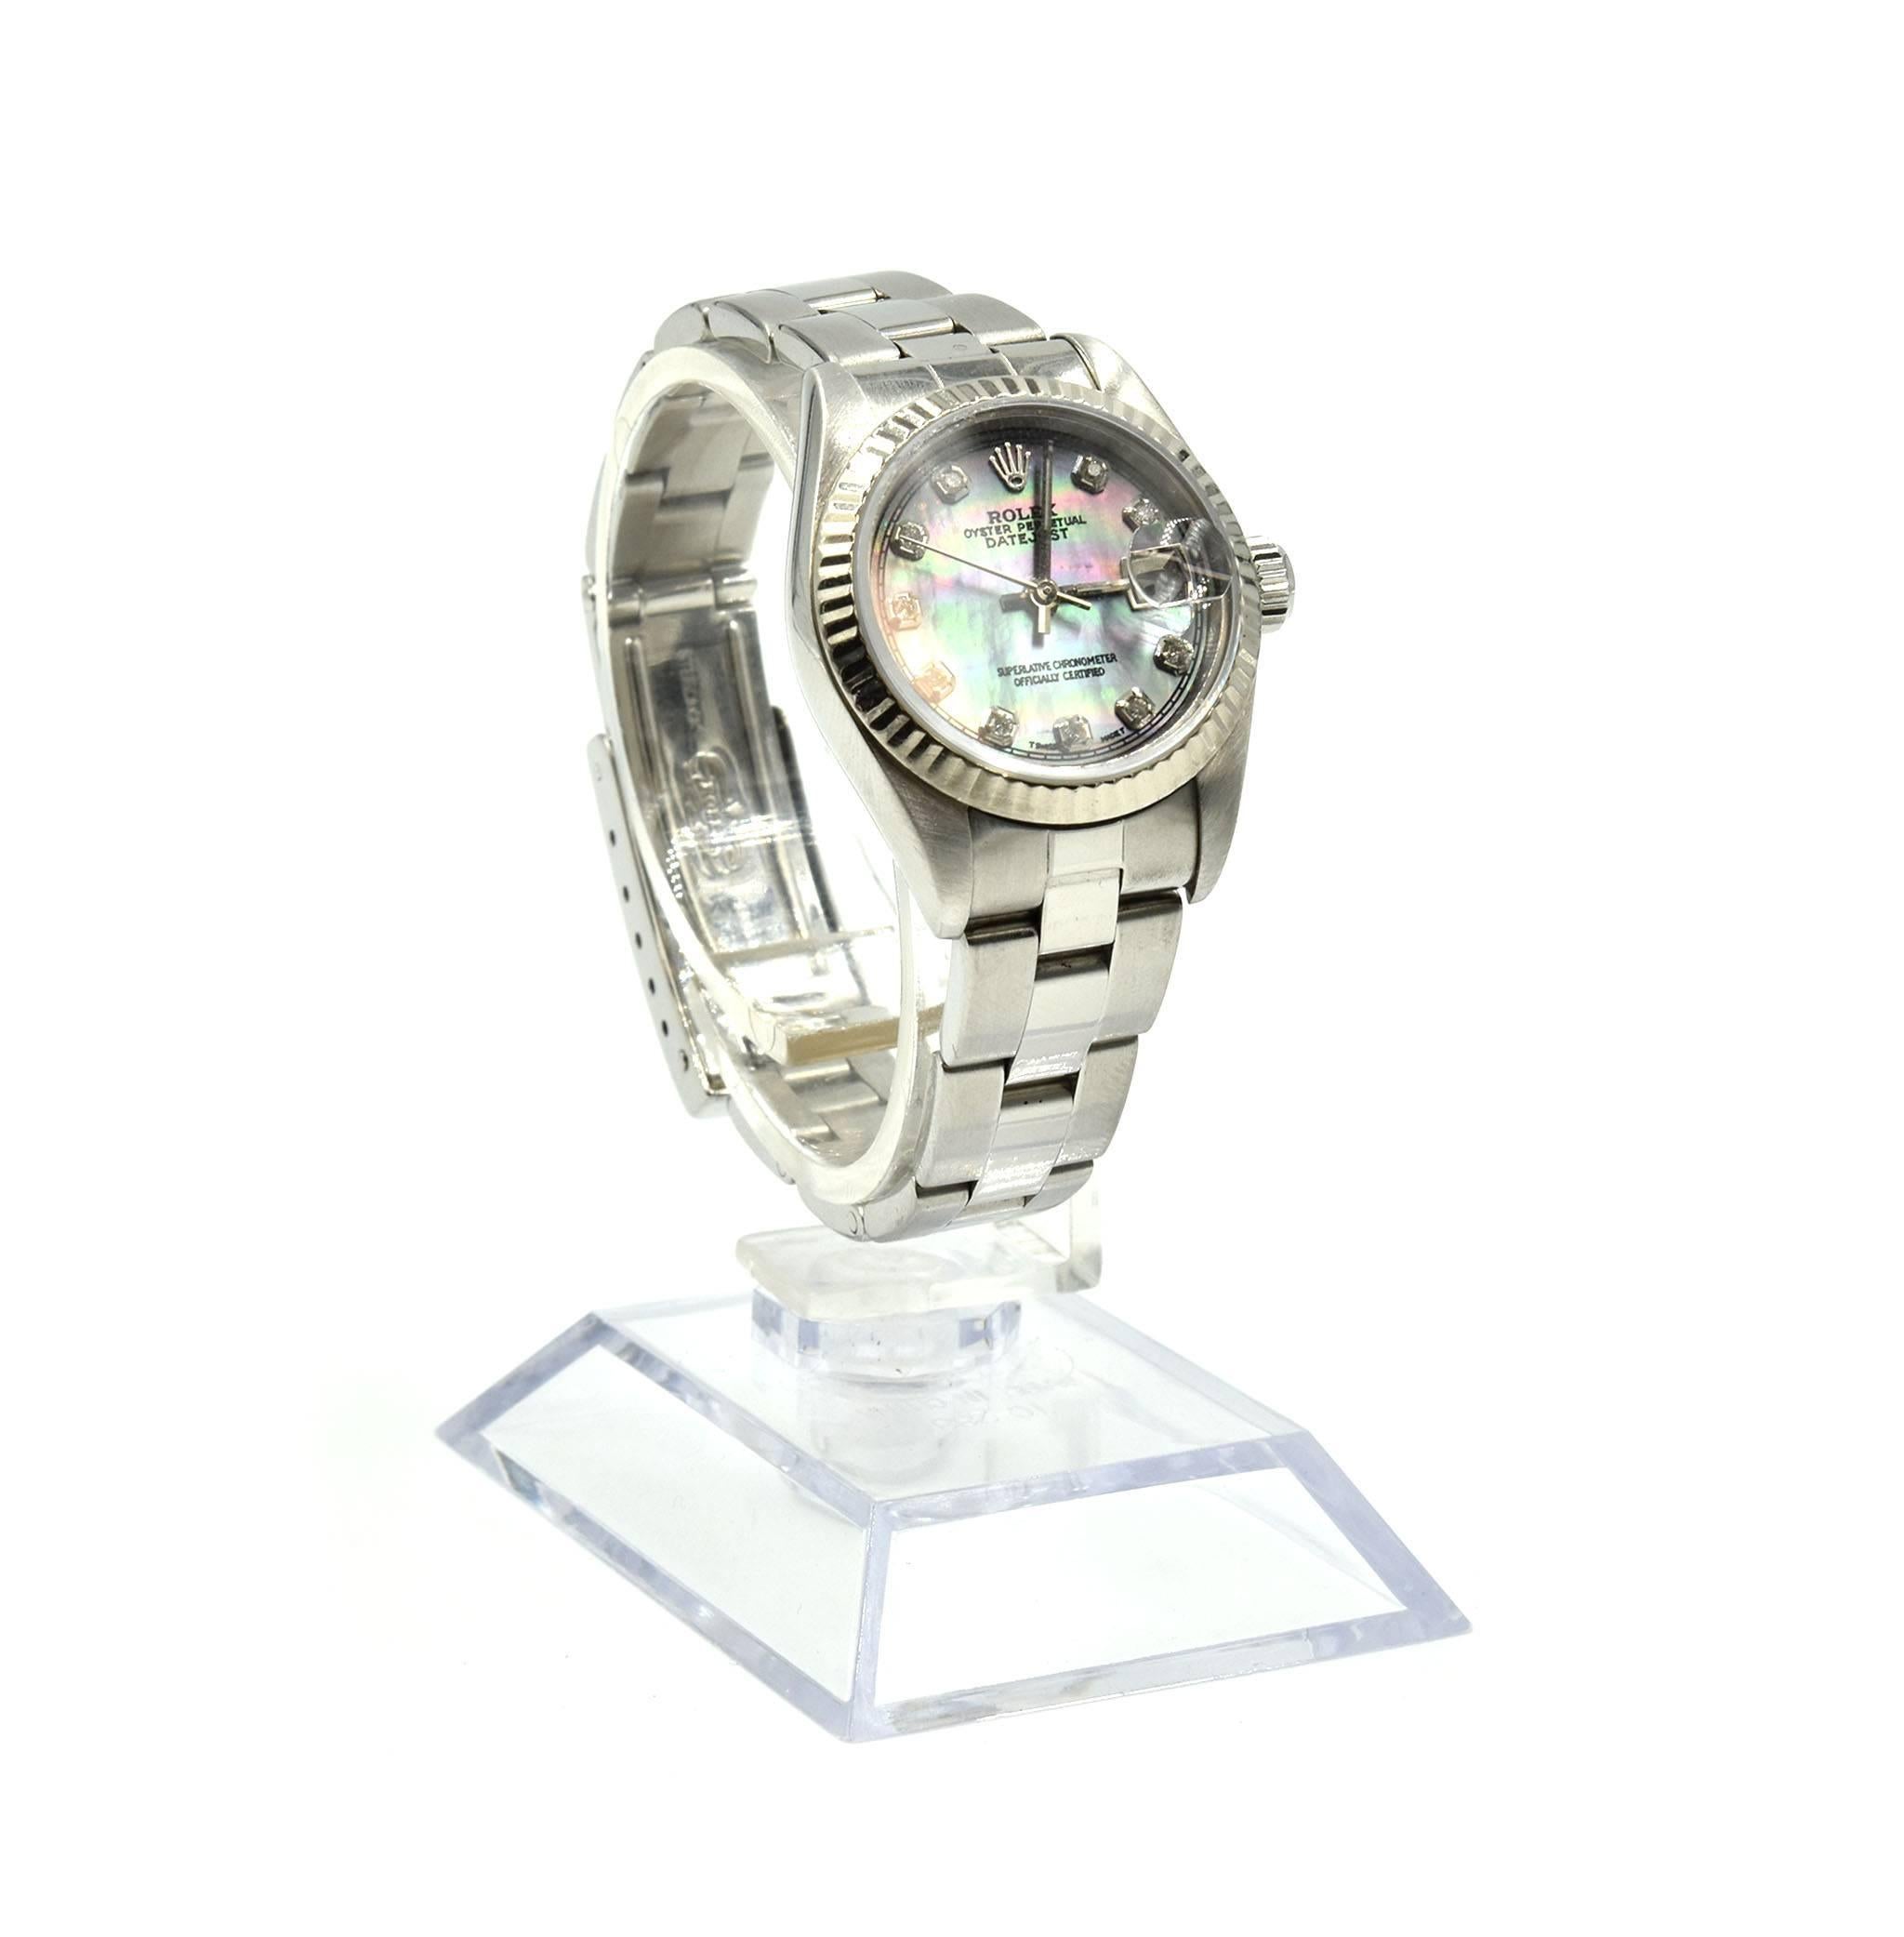 Movement: automatic
Function: hours, minutes, sweep seconds, date
Case: 26mm stainless steel case, sapphire crystal, fluted bezel, screwdown crown, water resistant to 100 meters
Band: stainless steel Oyster bracelet, fits up to a 6.5-inch